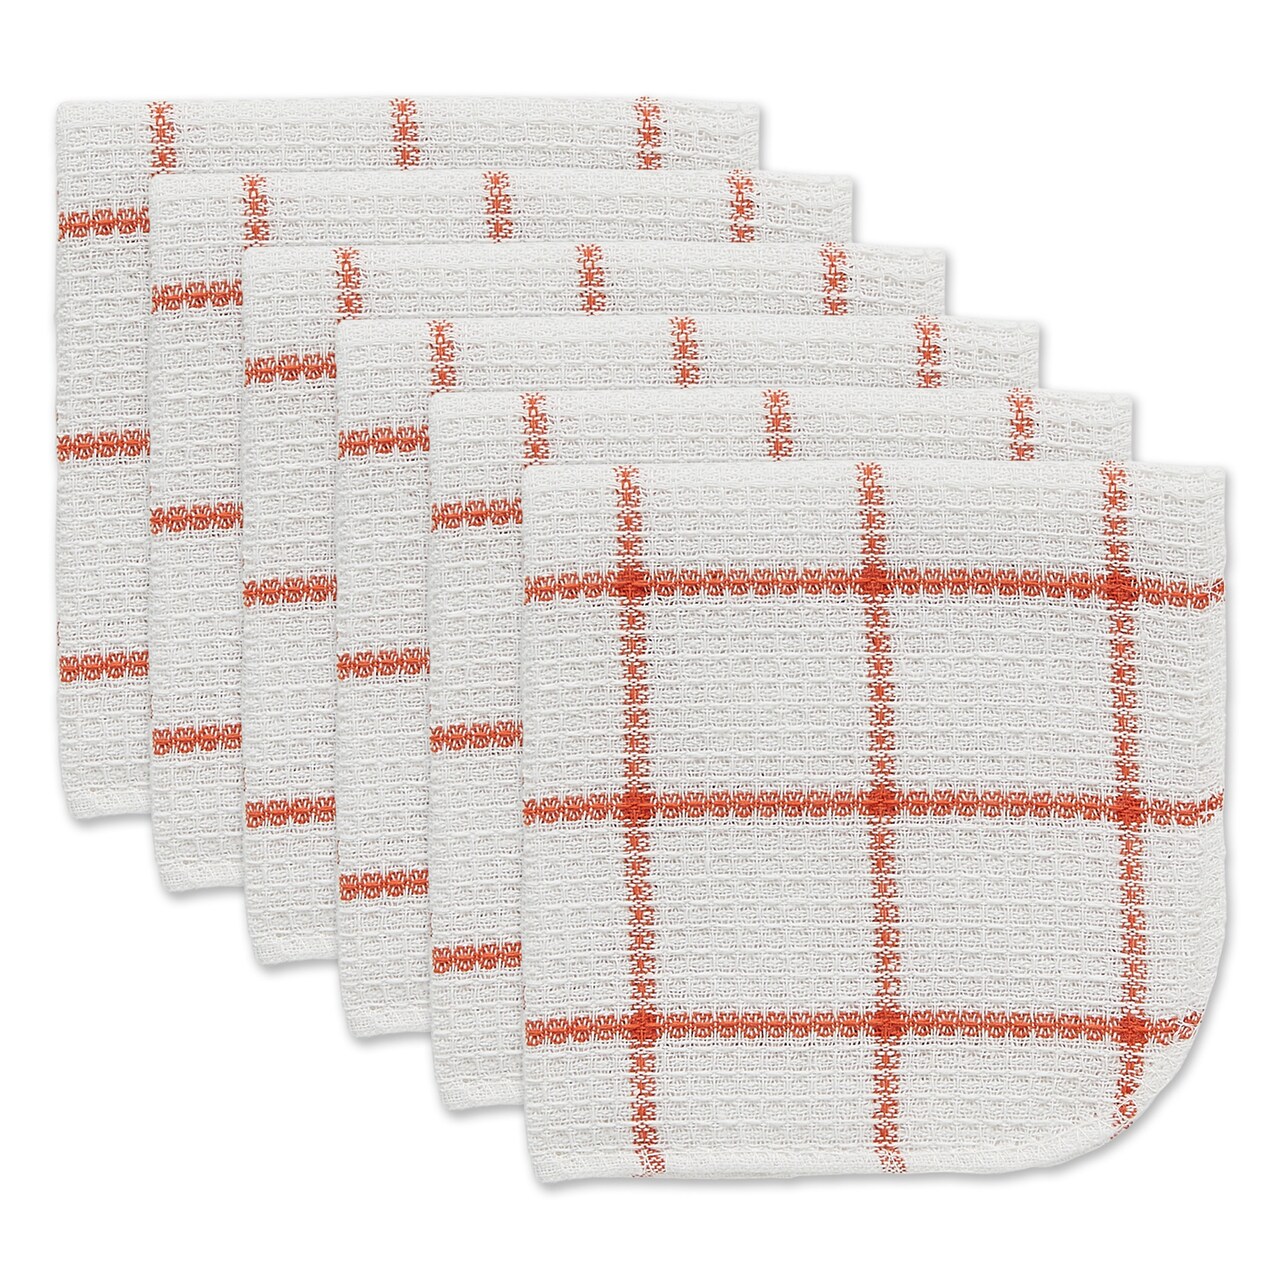 Contemporary Home Living Set of 6 Spice Red and White Scrubber Dish Cloth,  12